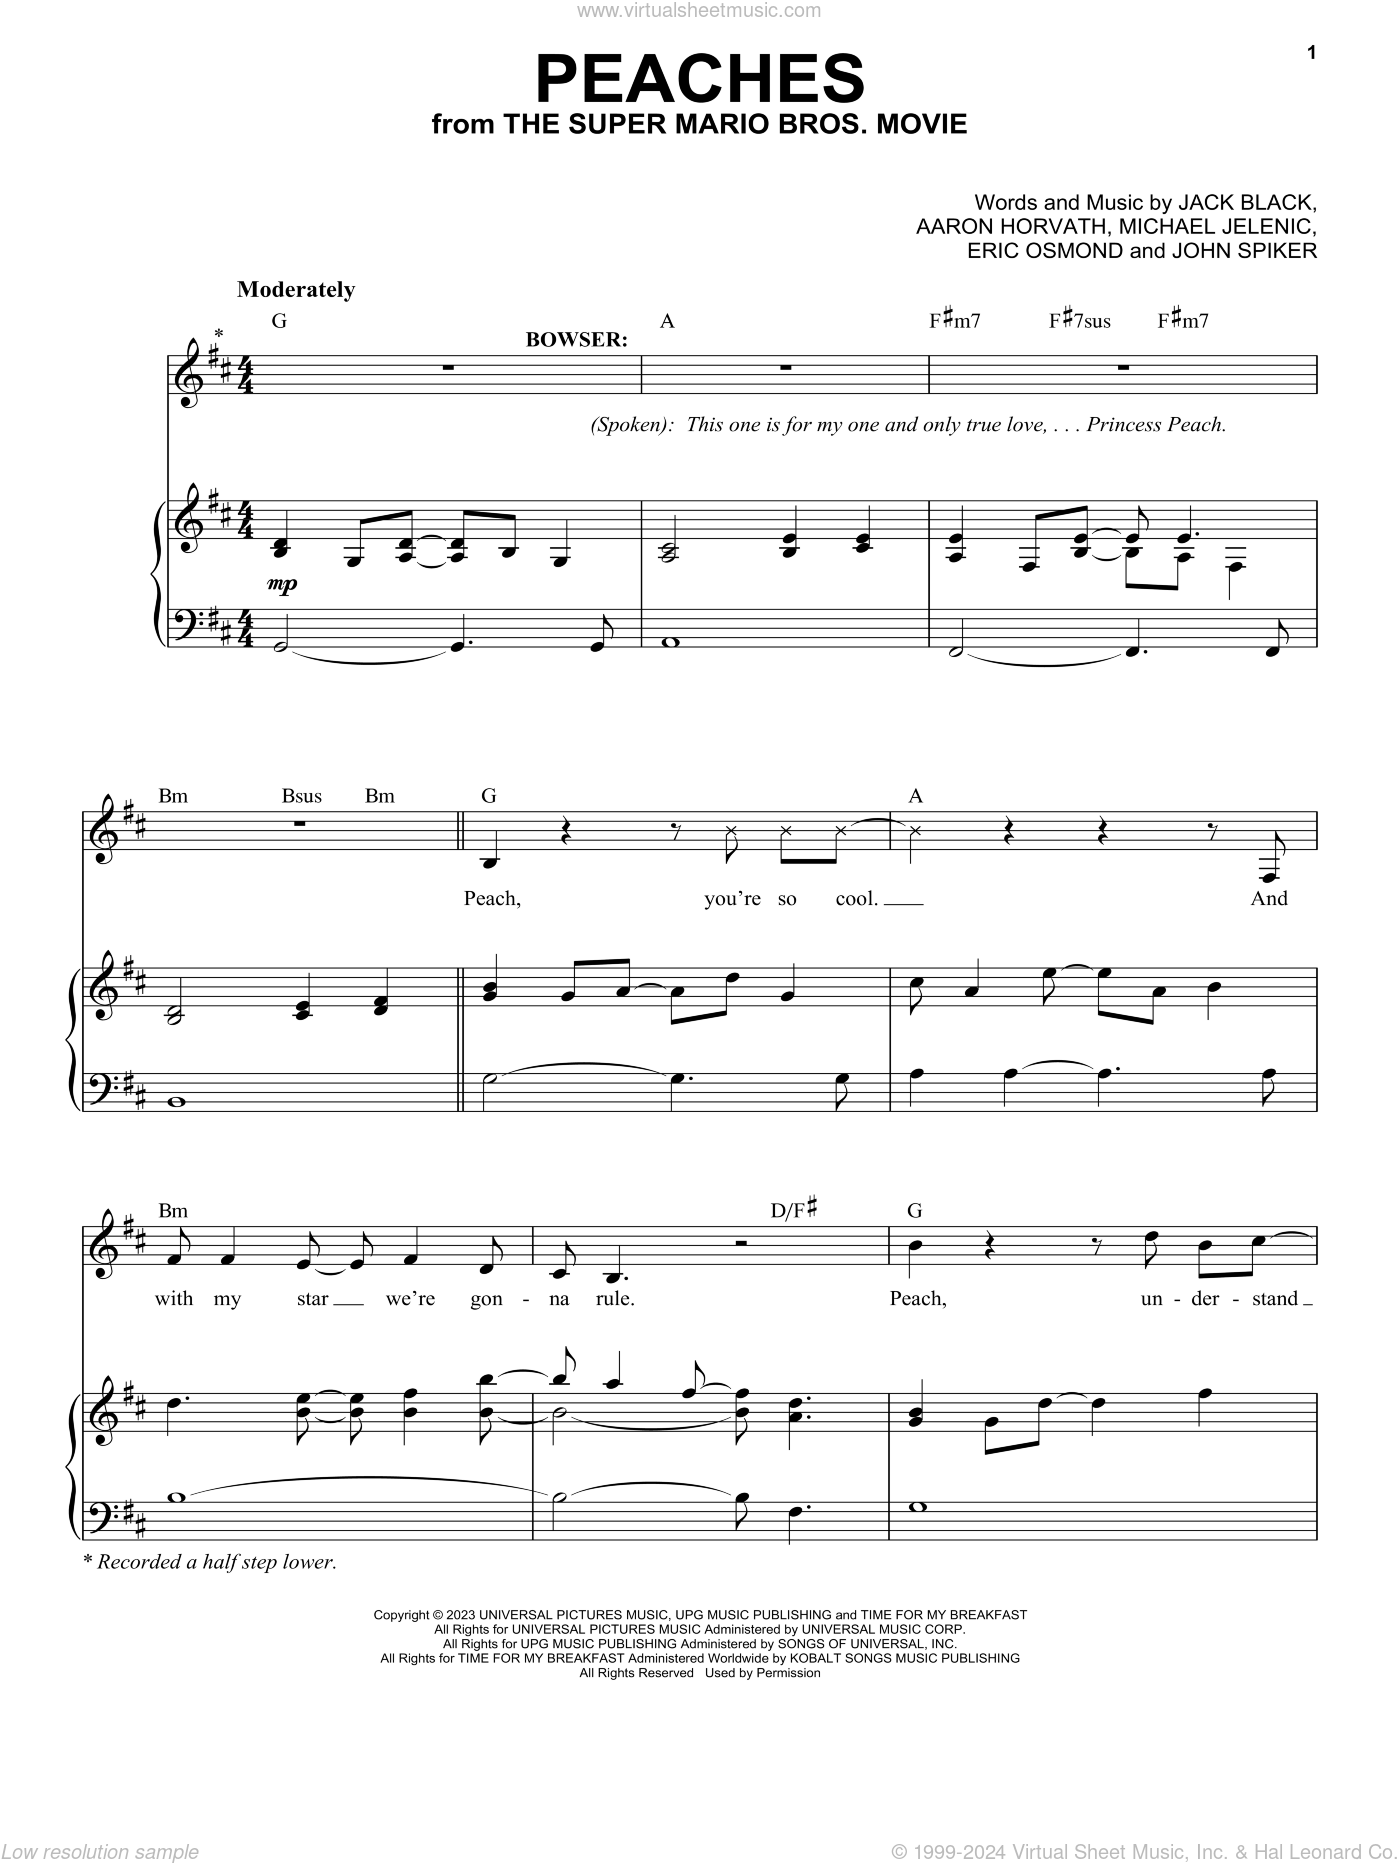 Peaches (from The Super Mario Bros. Movie) sheet music for voice